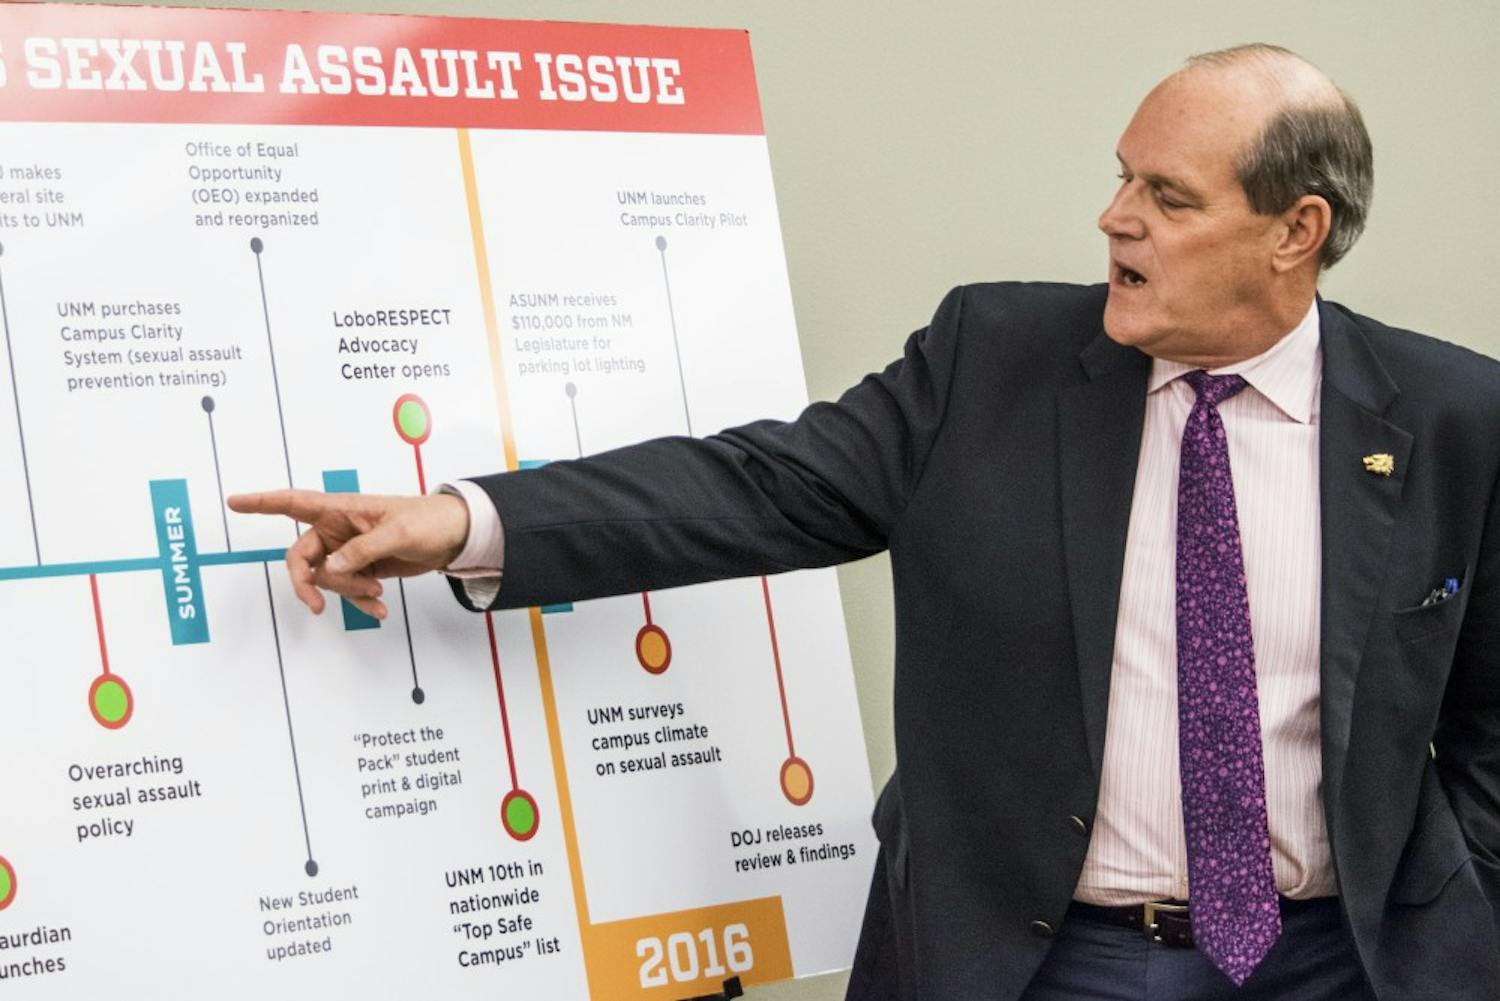 University President Robert Frank speaks at a conference held to address the Department of Justice's findings regarding sexual assault on UNM campus Friday April 22, 2016. Several UNM departments and organizations, such as UNMPD and LoboRESPECT, have issued statements regarding the DOJ’s findings.